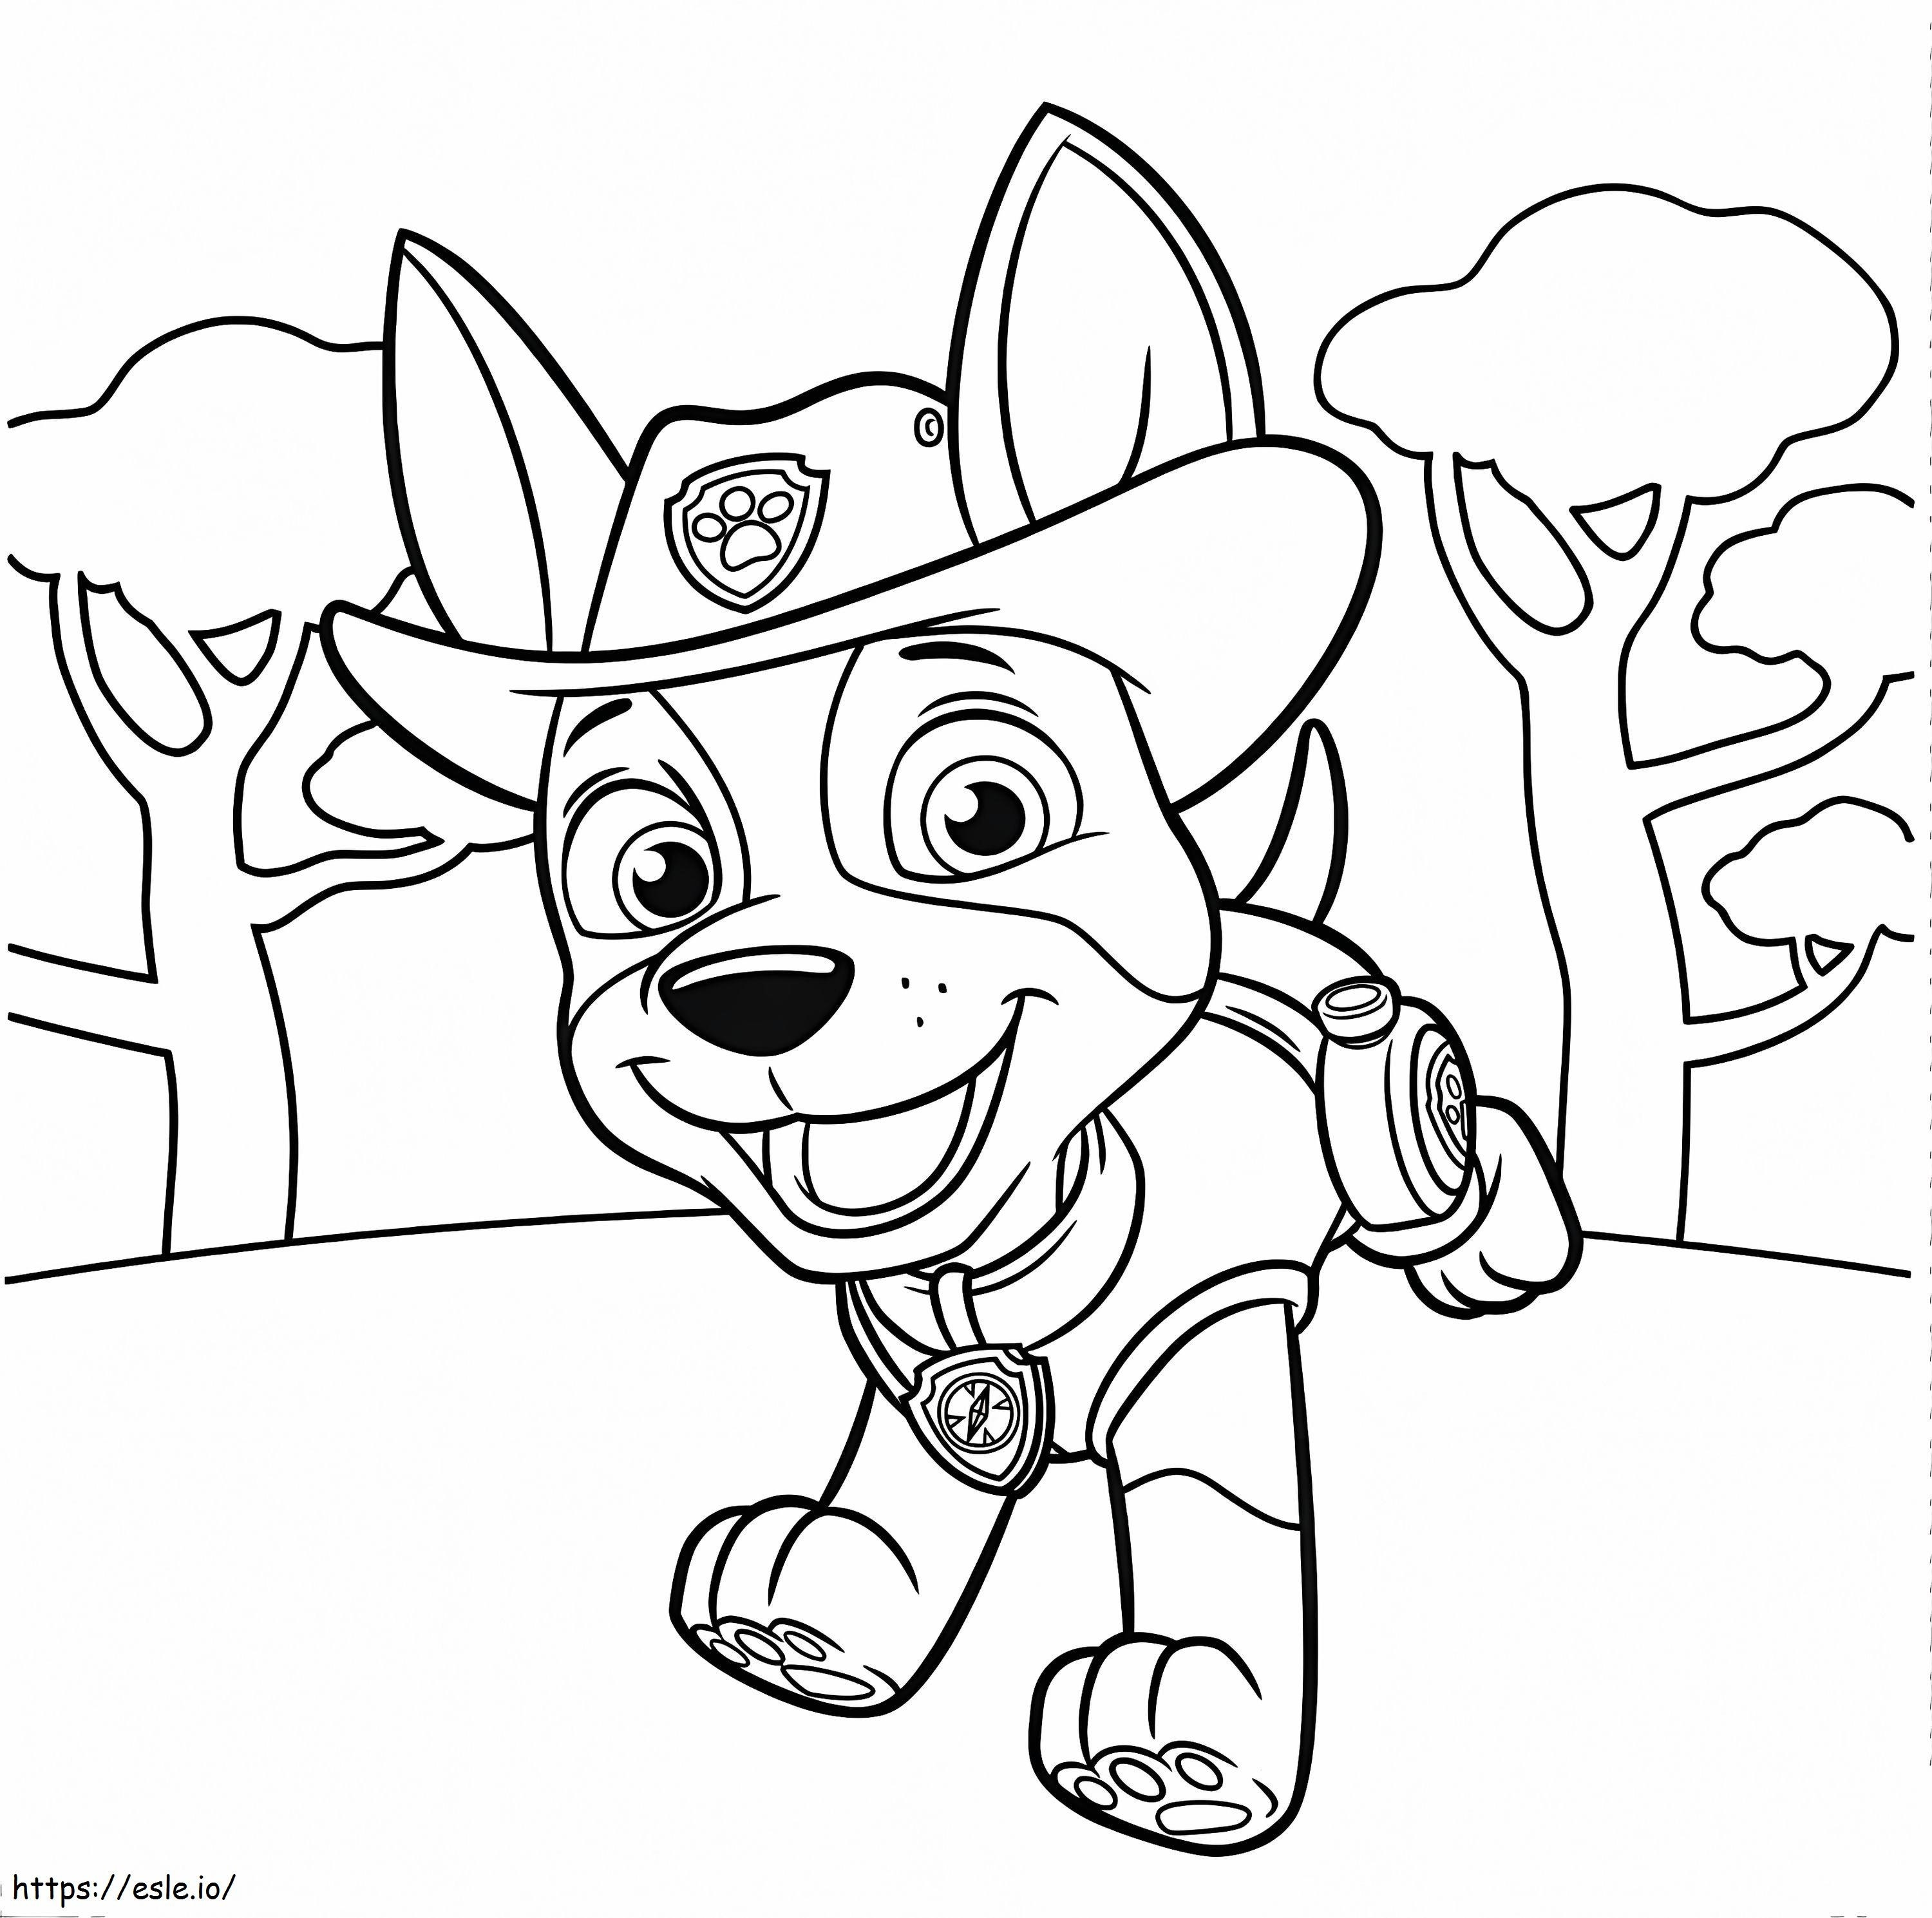 Happy Tracker Paw Patrol coloring page